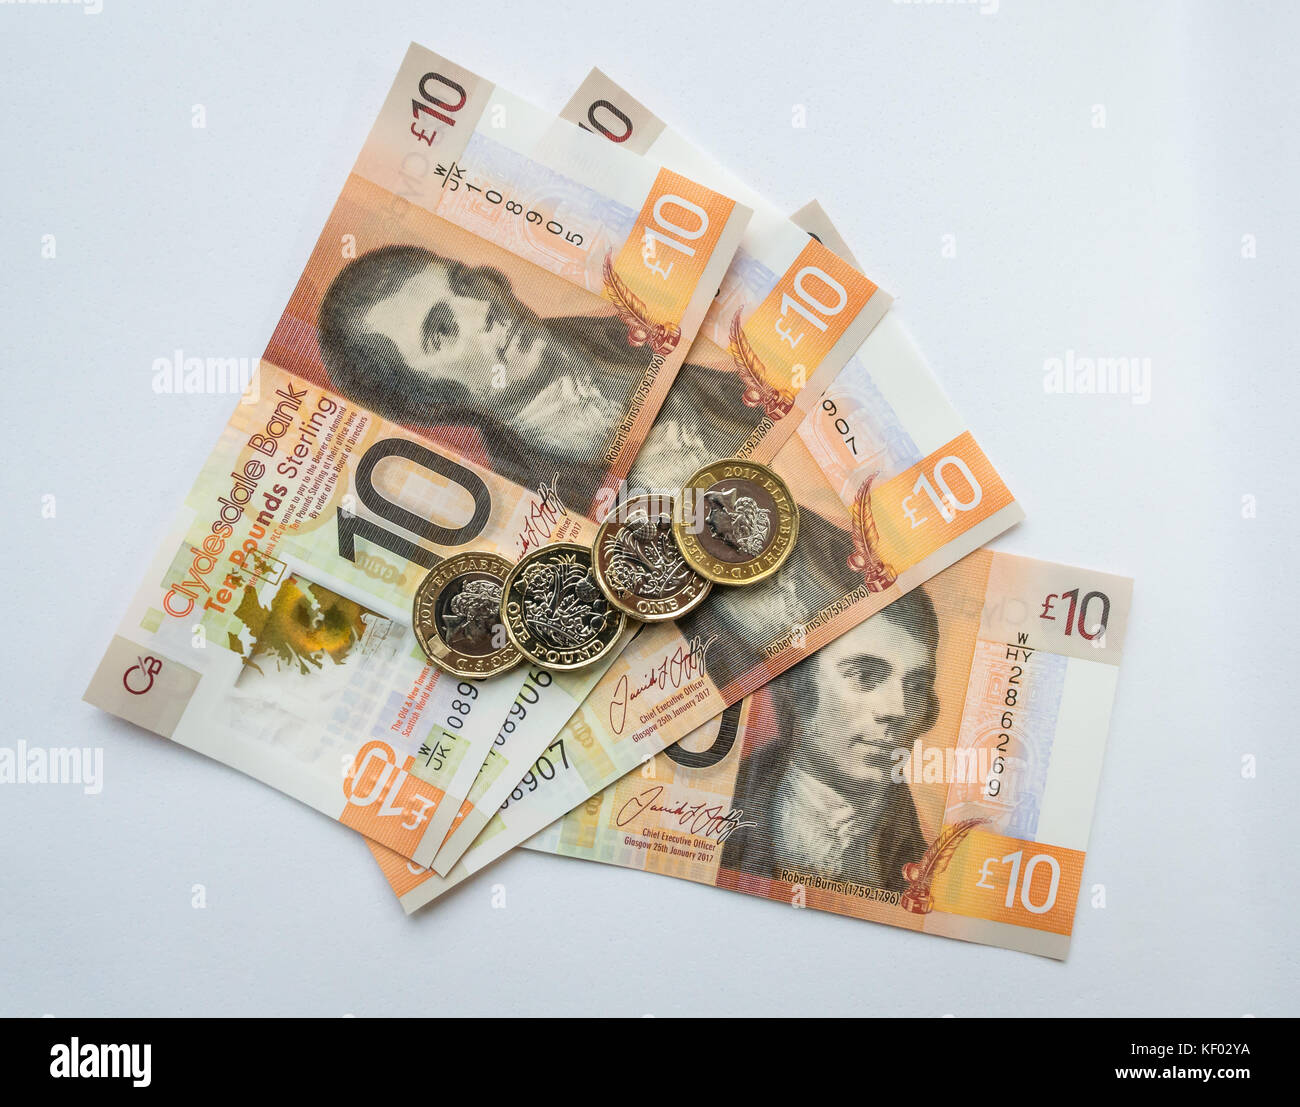 Plastic polymer Clydesdale Bank Scottish ten pounds £10 banknotes with Robert Burns and hexagonal one pound £1 coins on a plain white background Stock Photo